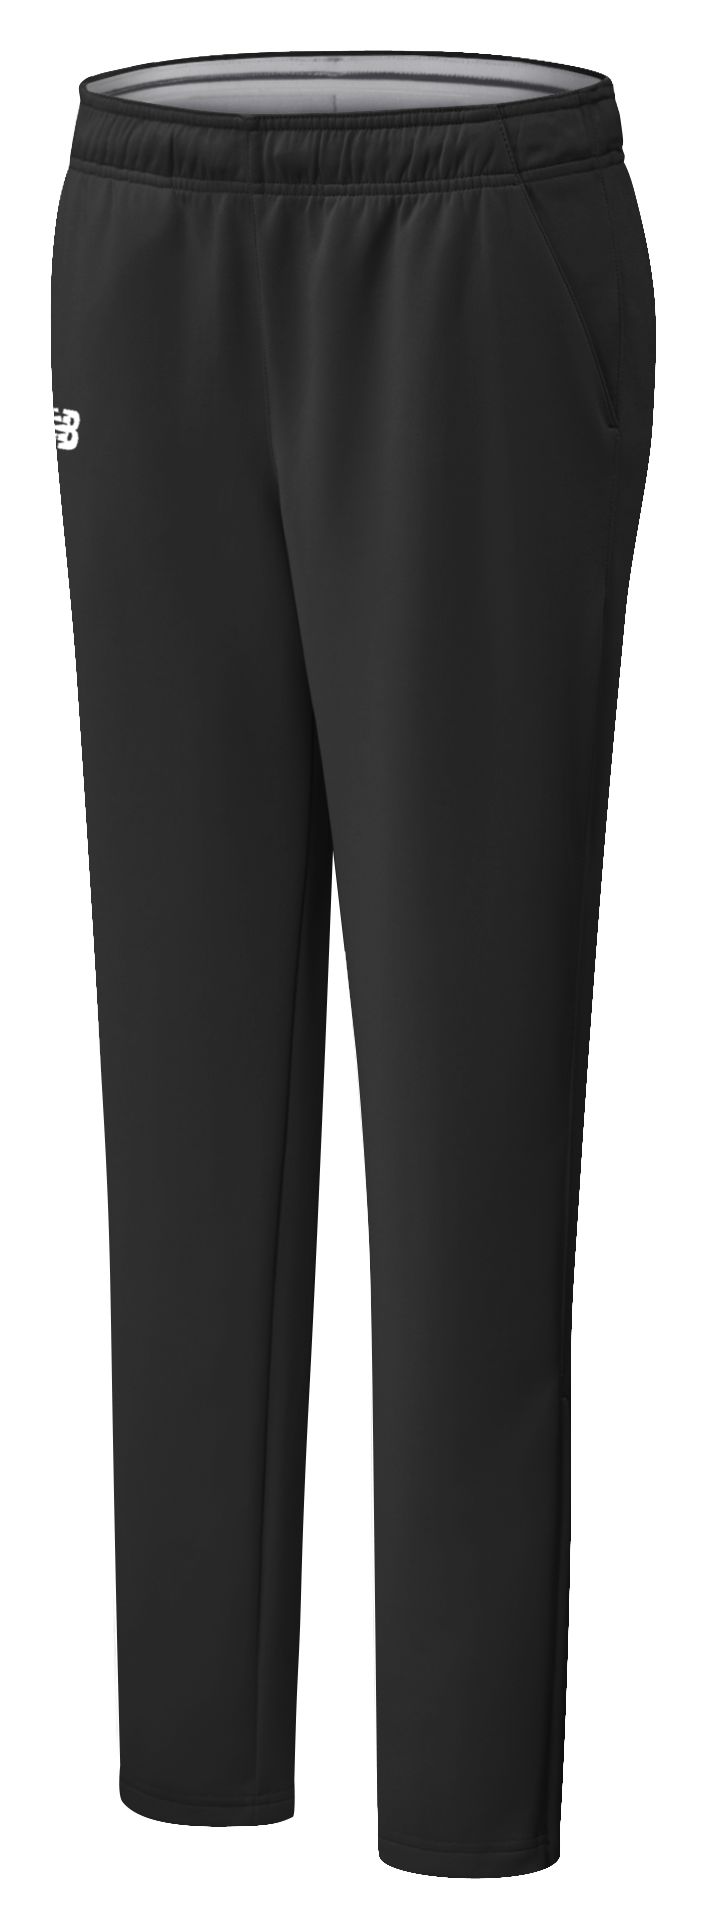 Buy Women's Microfiber Fabric Regular Fit Solid Travel Pants with